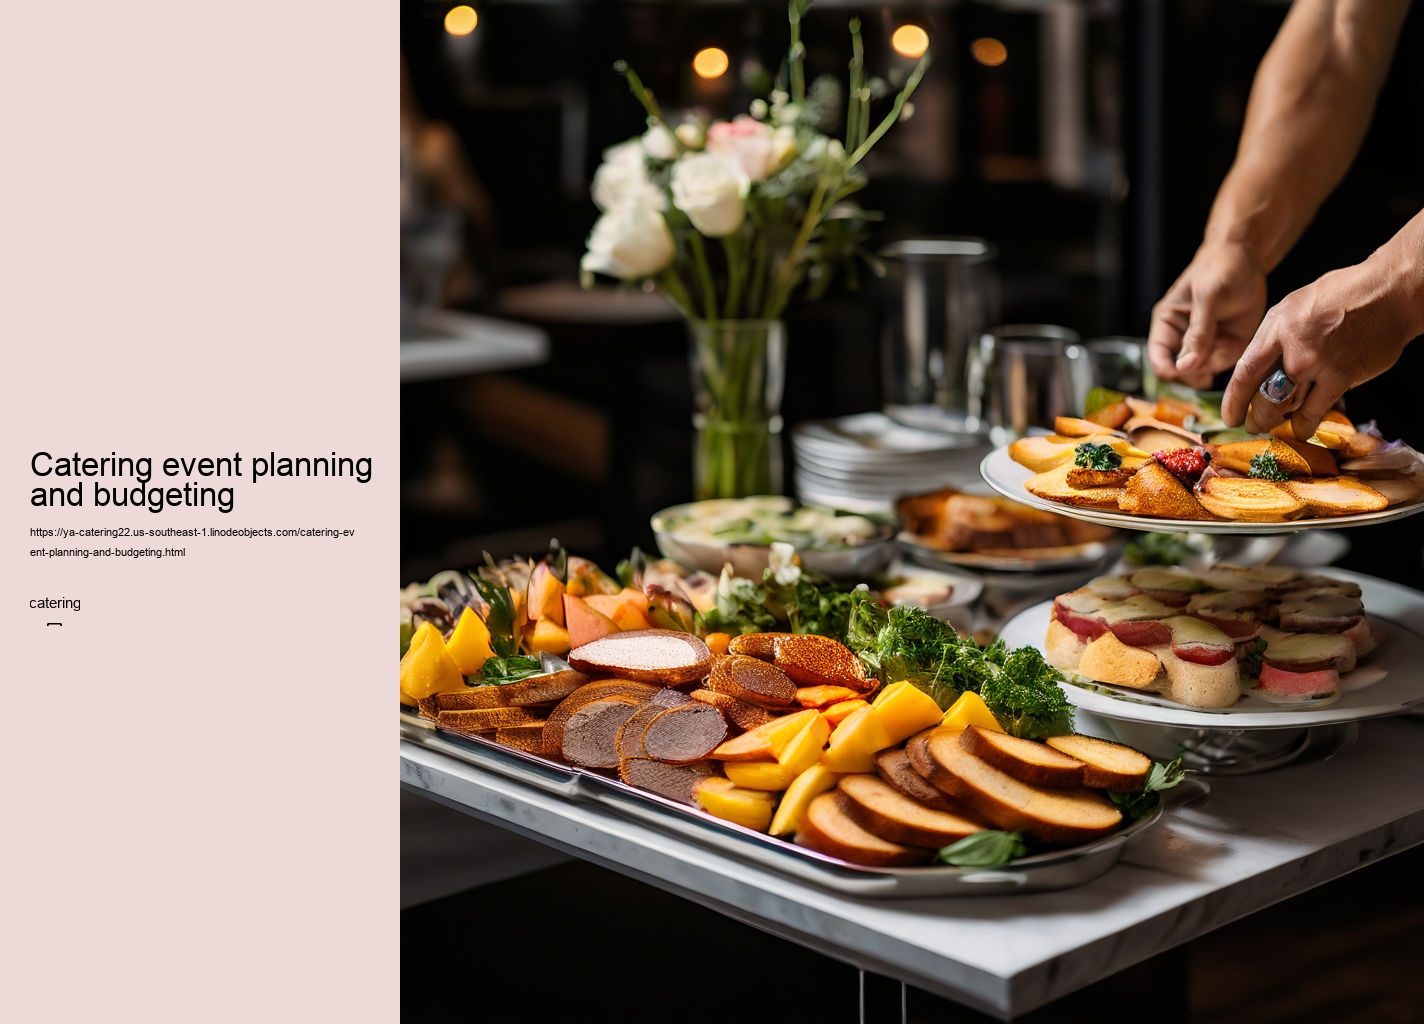 Catering event planning and budgeting